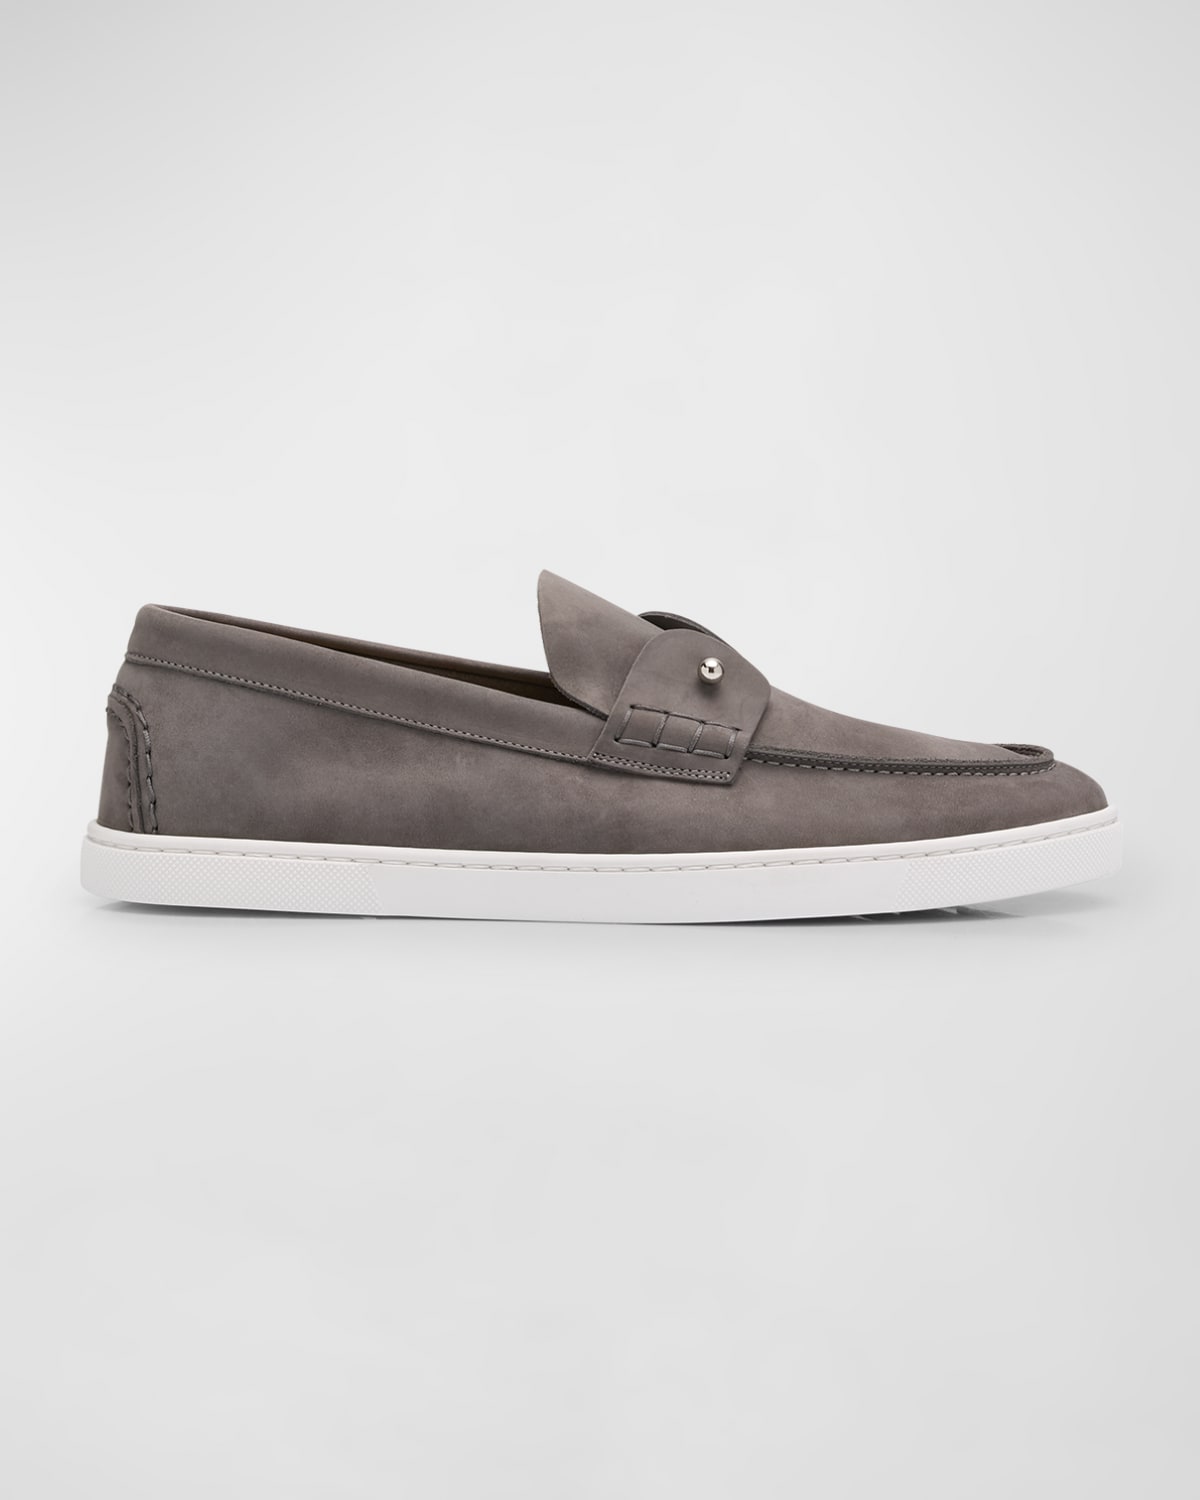 Christian Louboutin Men's Chambeliboat Suede Boat Shoes In Gray